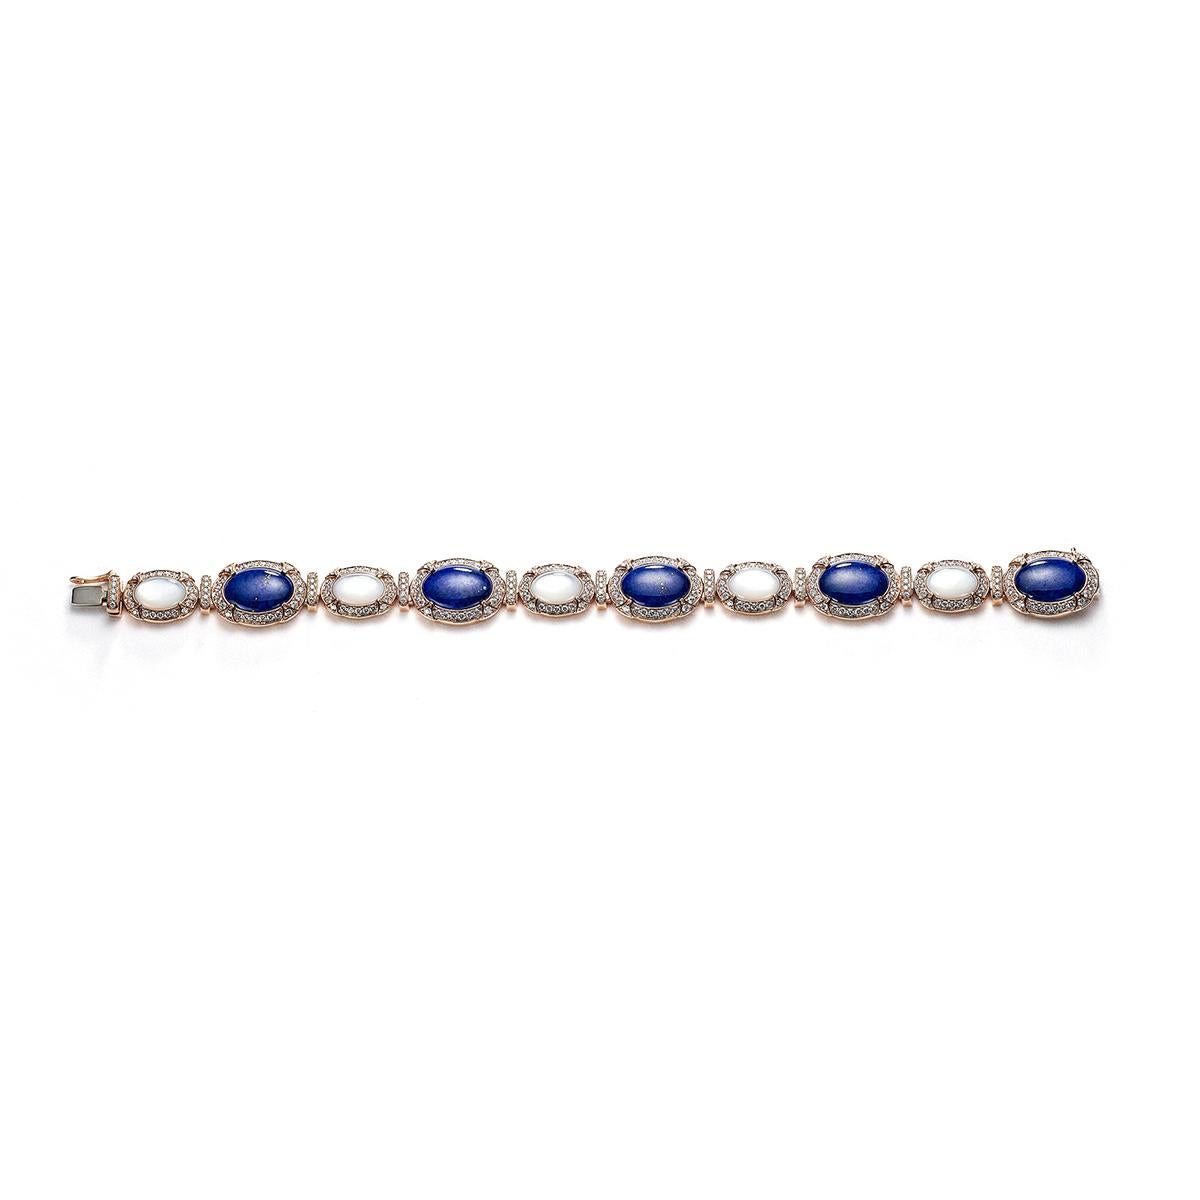 Bracelet in 18kt pink gold set with 290 diamonds 2.47 cts, 5 mother-of-pearl 4.56 cts and 5 lapis lazuli 9.93 ct           